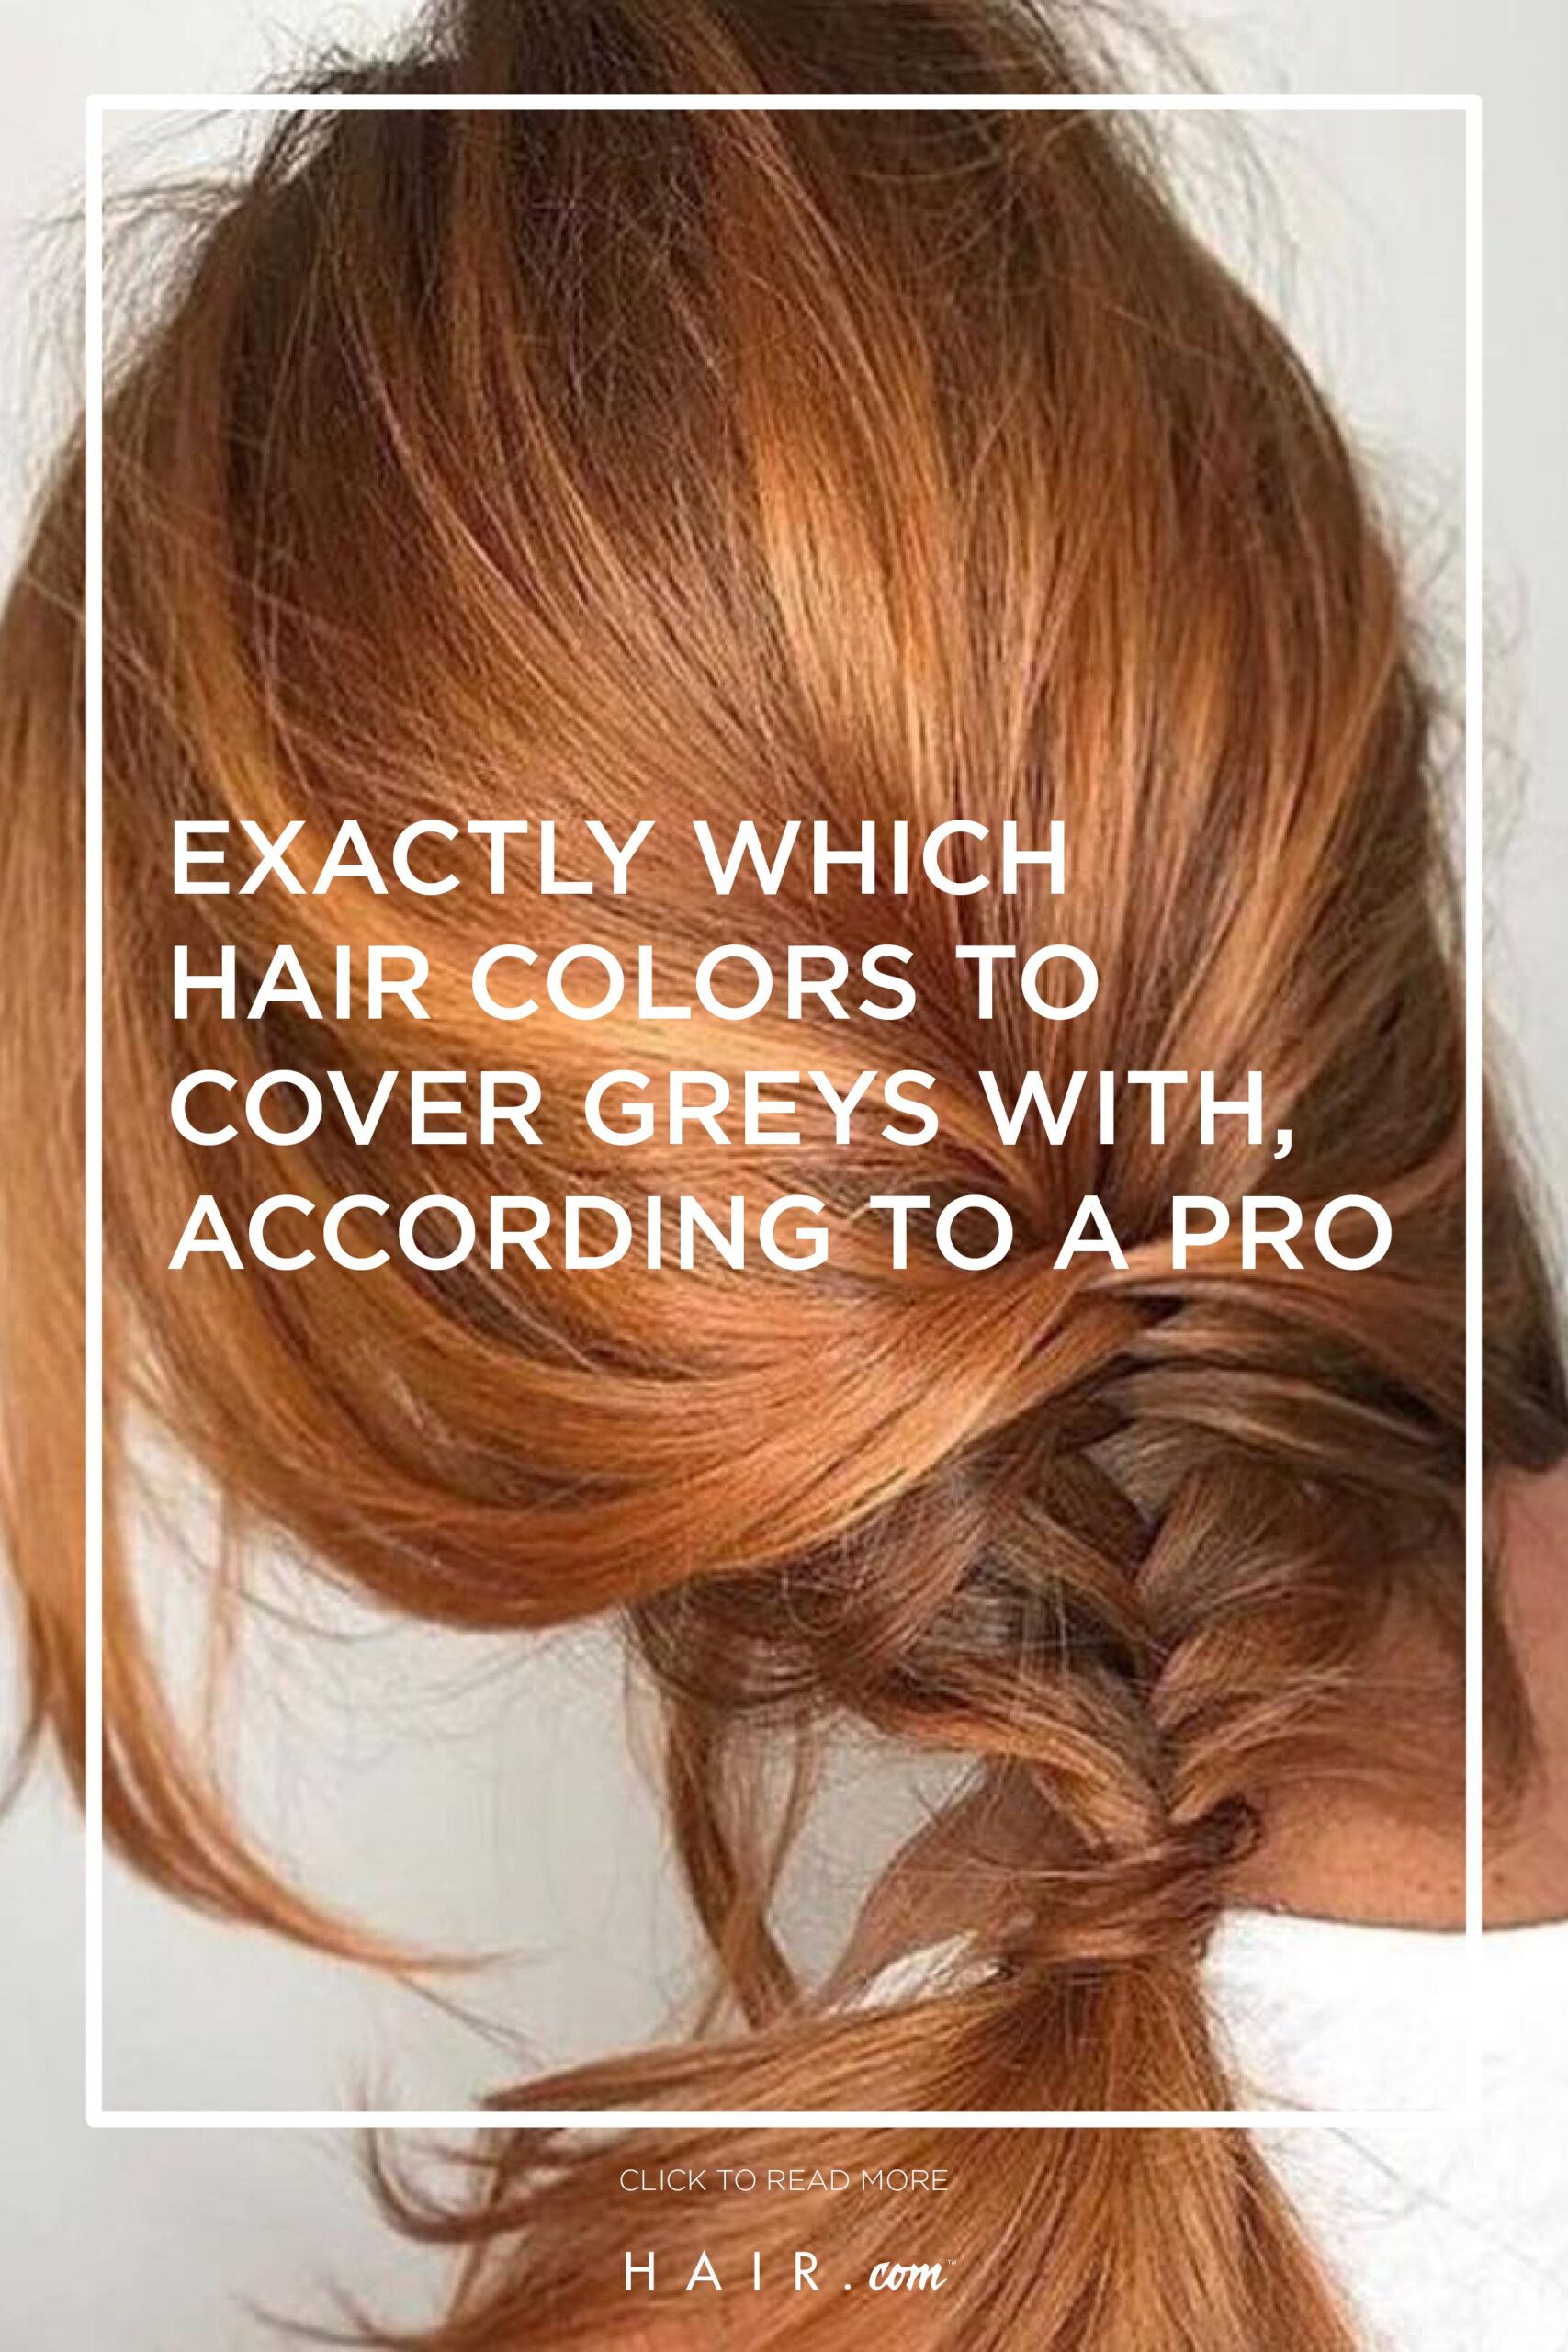 What is the best color to cover gray hair